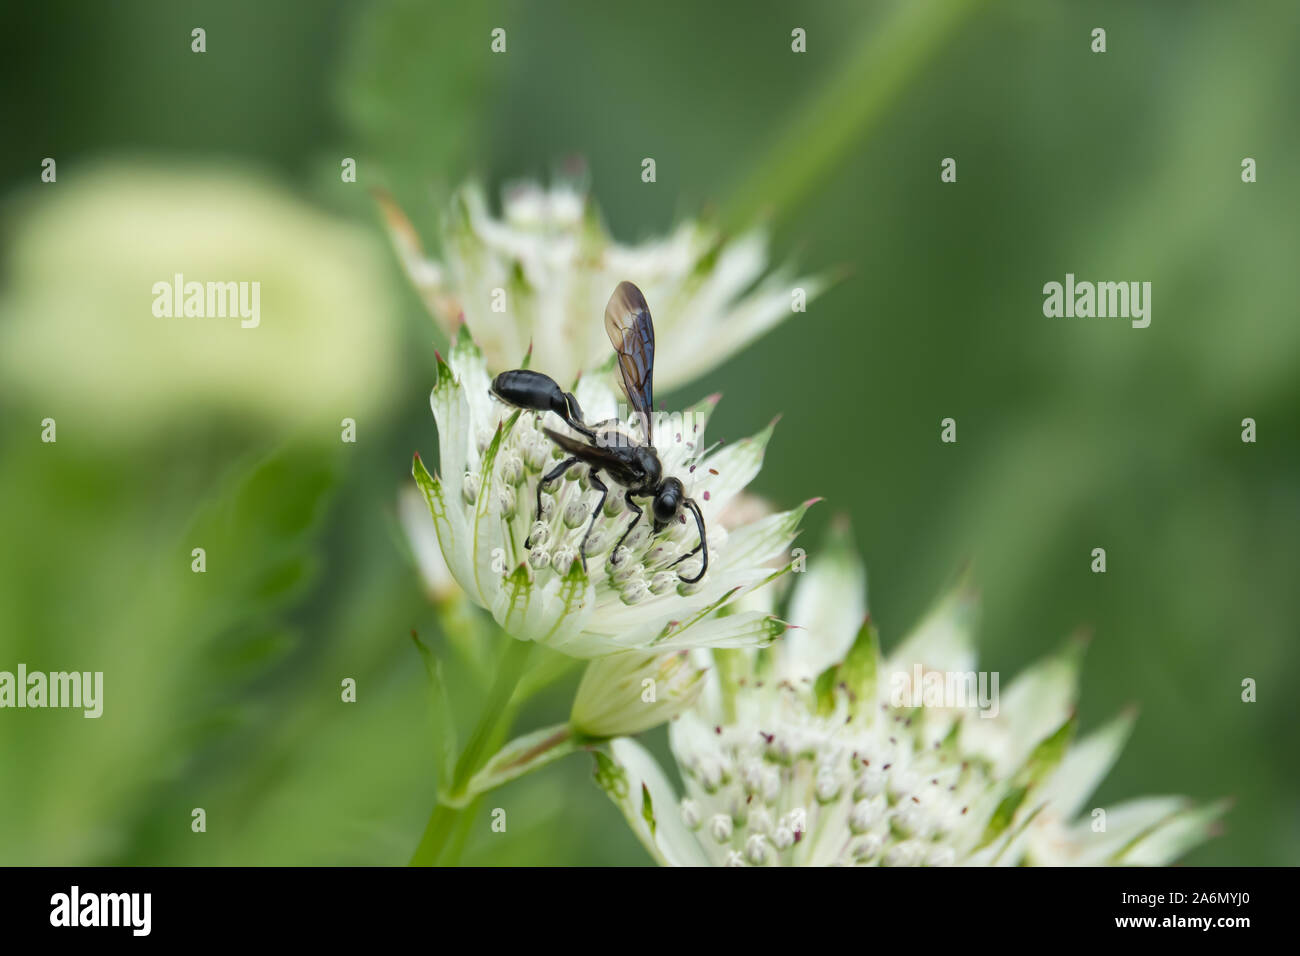 Grass Carrying Wasp on Great Masterwort Flowers in Springtime Stock Photo